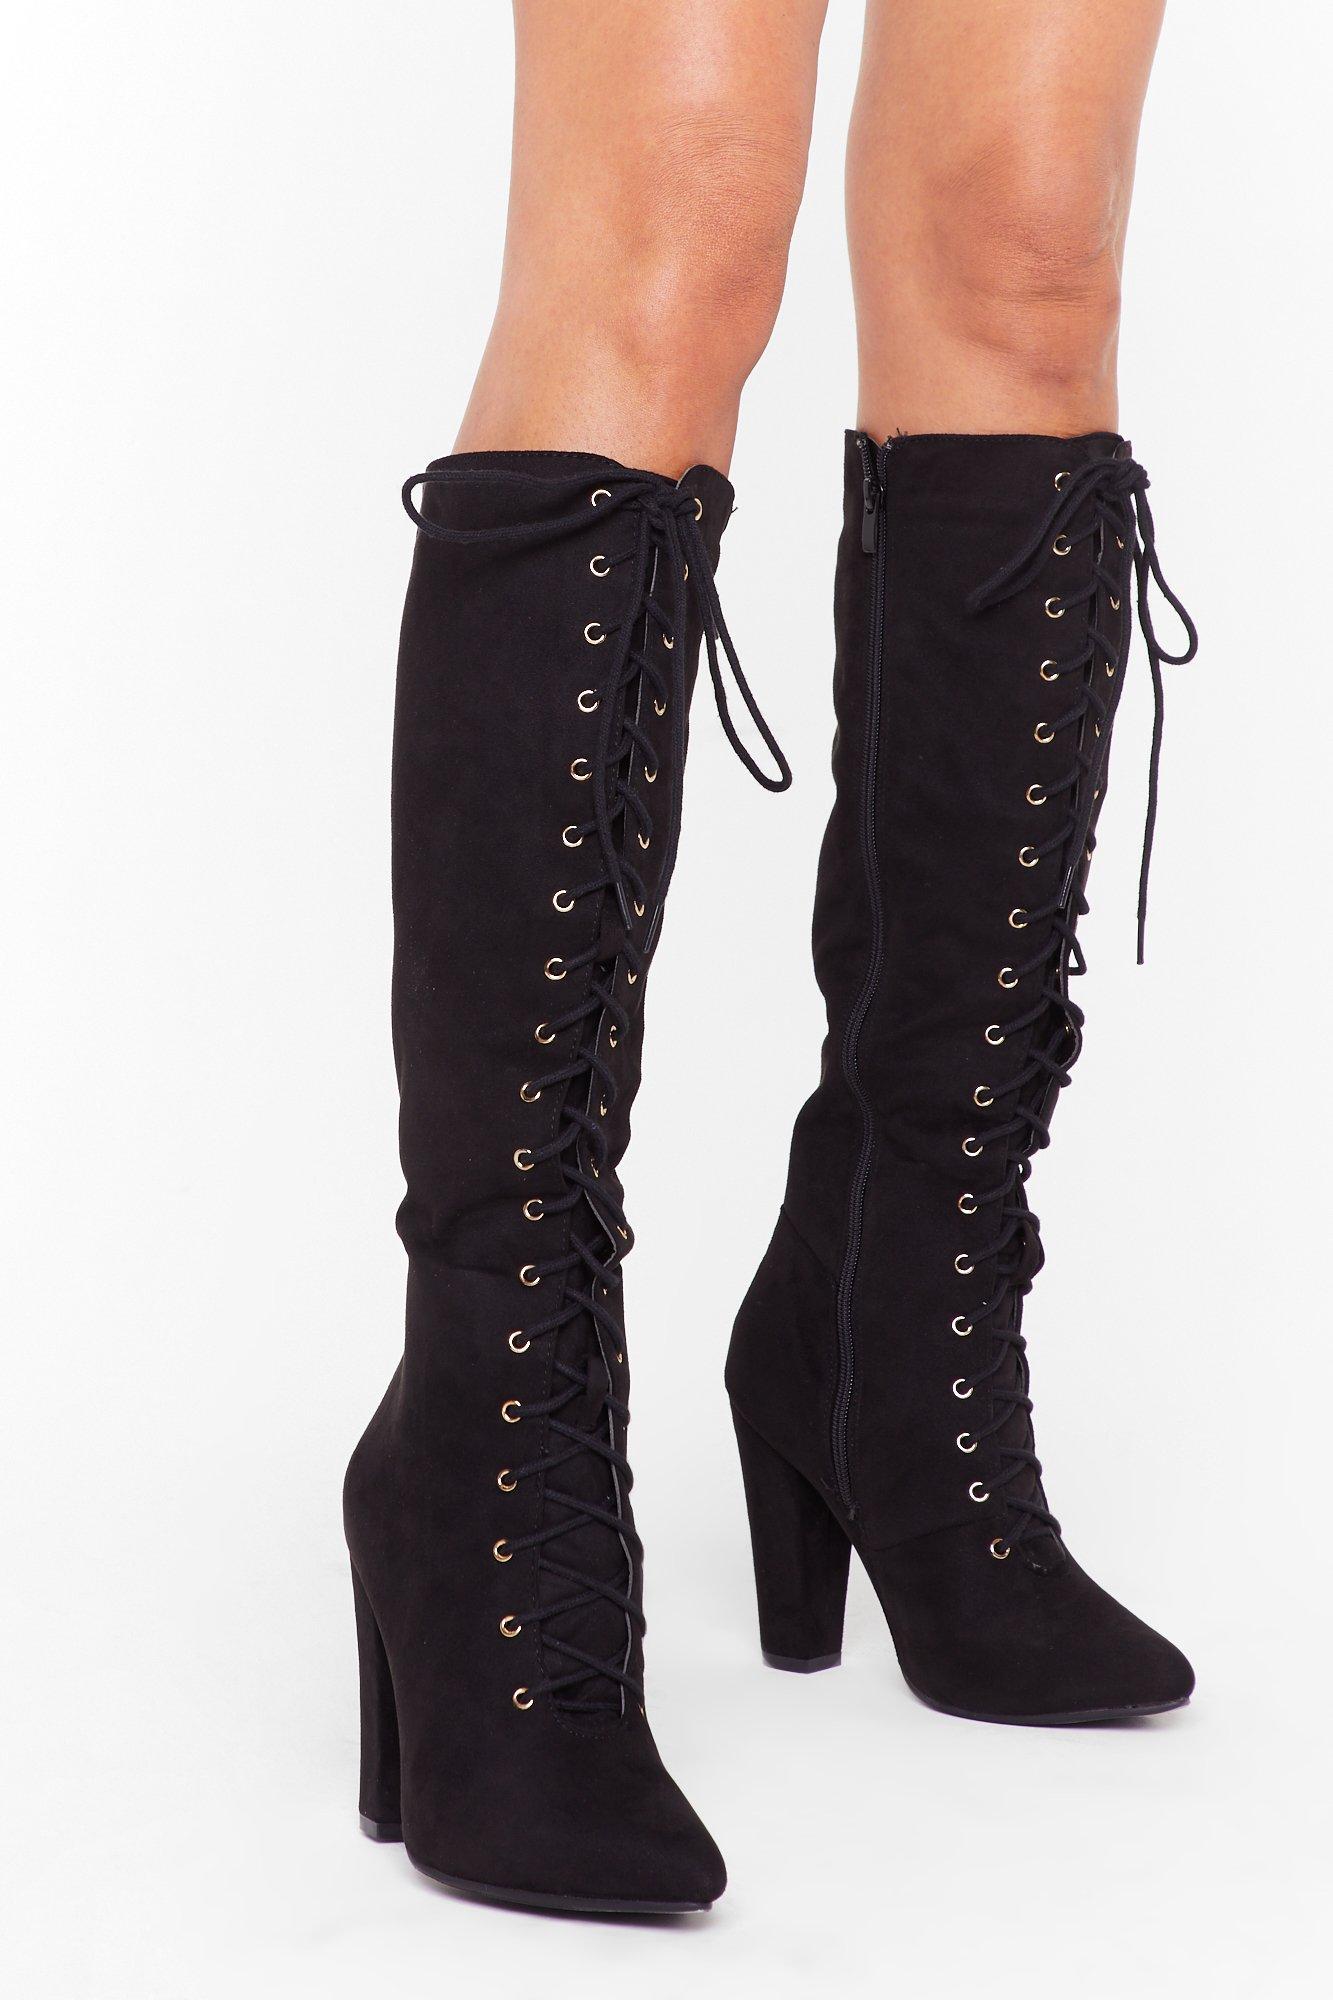 all black knee high boots